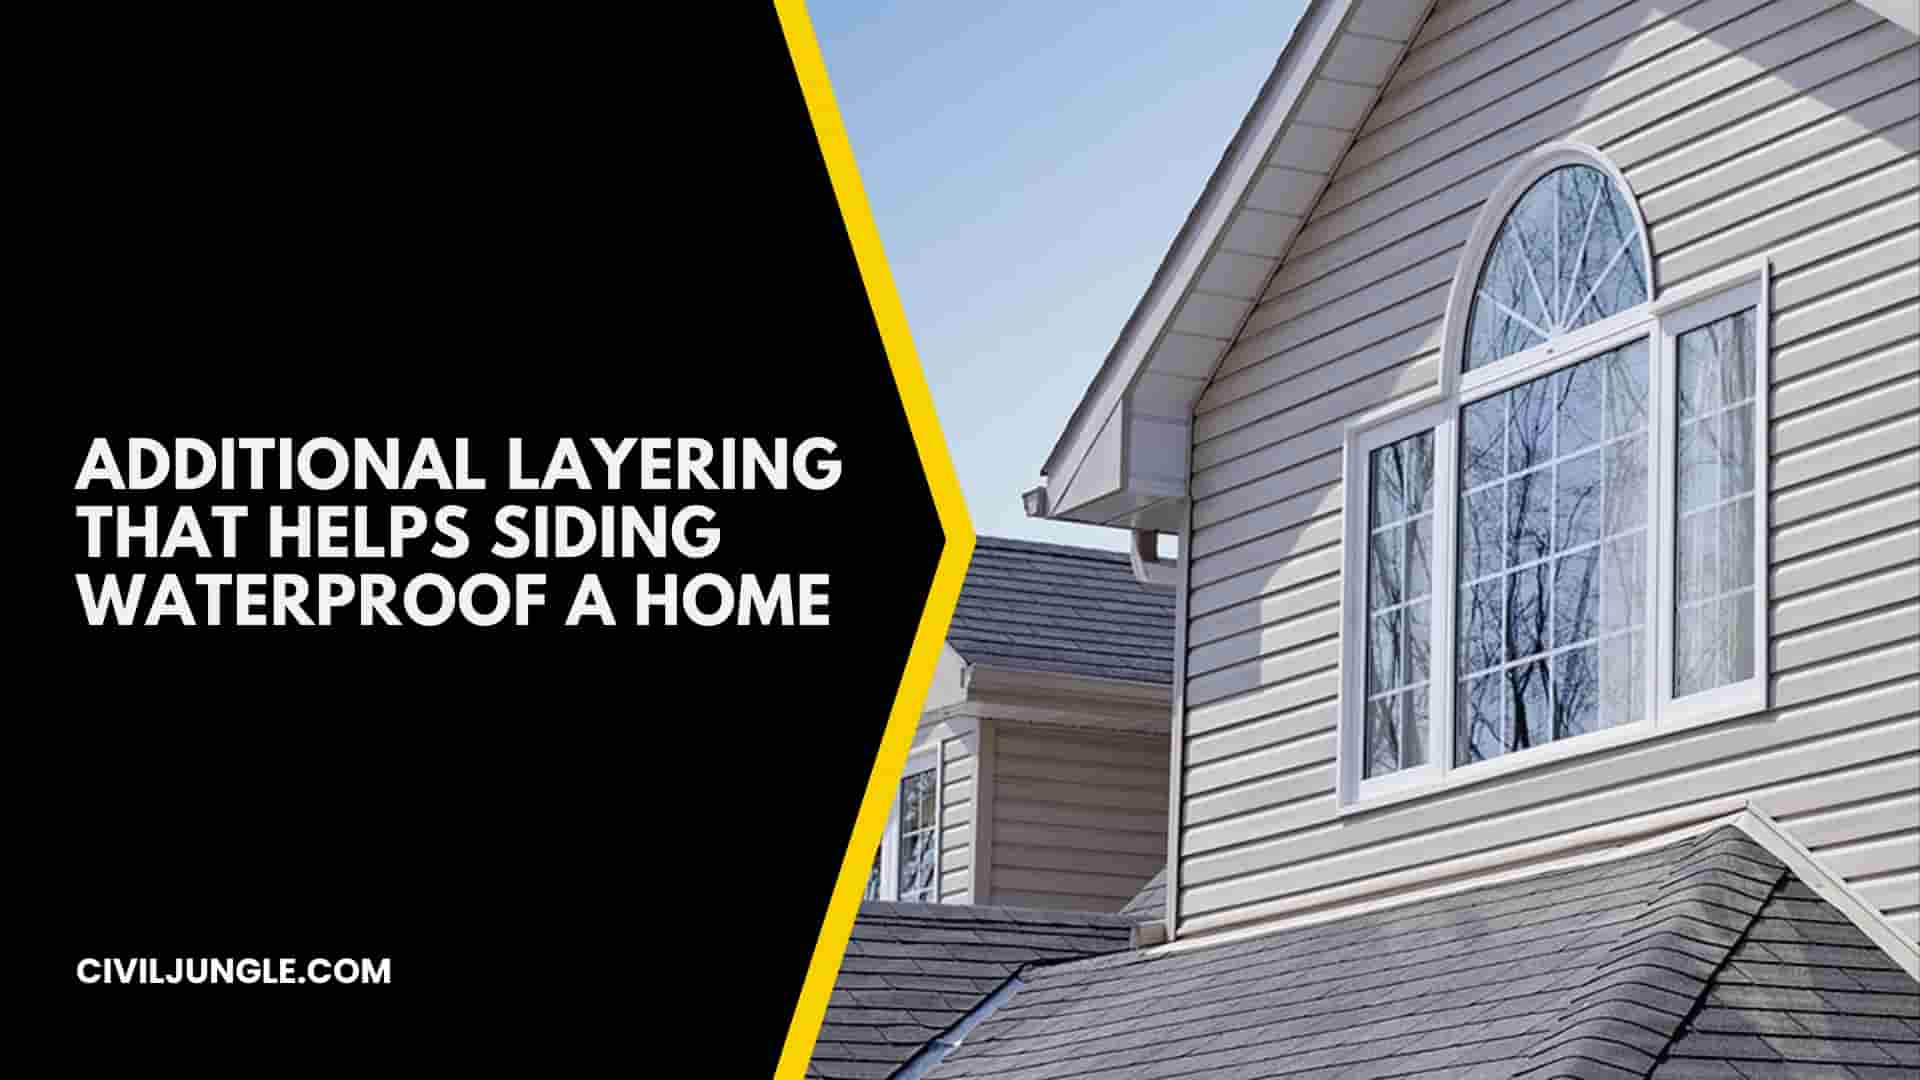 Additional Layering That Helps Siding Waterproof a Home